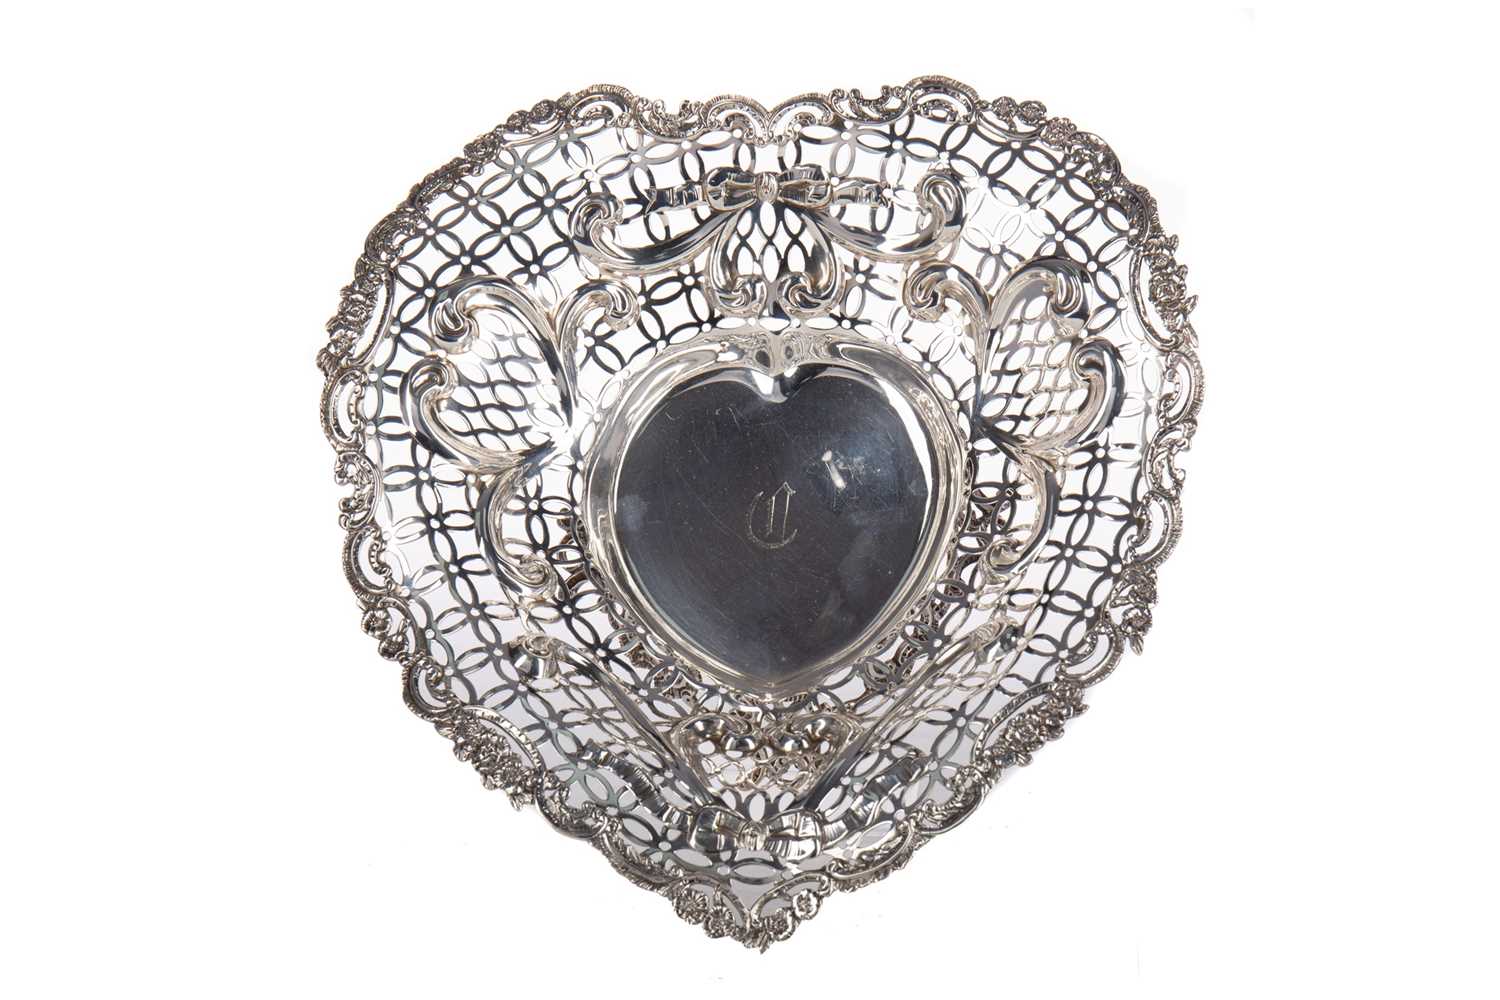 Lot 23 - A VICTORIAN SILVER HEART-SHAPED COMPORT